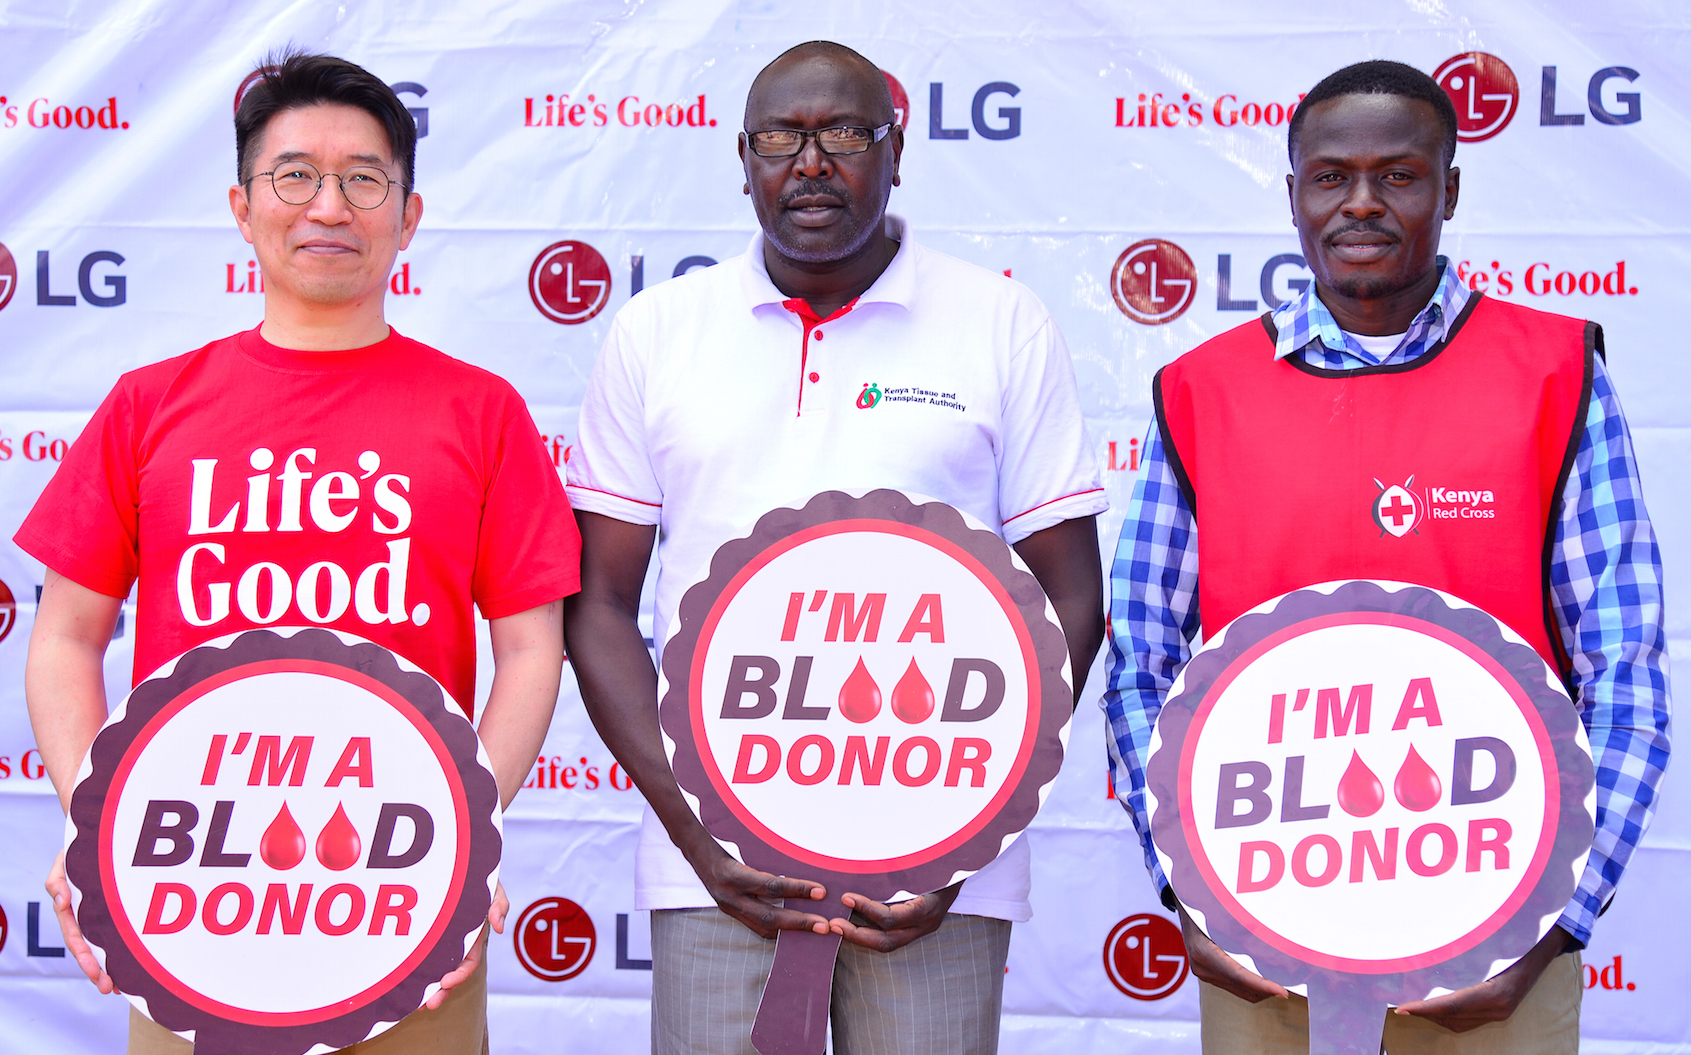 LG Electronics EA Managing Director, Dongwon Lee, Kenya Tissue and Transplant Authority (KTTA) Regional Manager for Nairobi Region, Festus Koech, and Red Cross Kenya Blood Donation Coordinator for Nairobi County, Bradley Namulanda, pose for a photo during the official blood donation partnership launch aimed at addressing the growing blood shortage in the country. This partnership highlights LG's commitment to bringing the concept of a better life, embedded in their motto "Life's Good," to a broader community beyond their products and services.